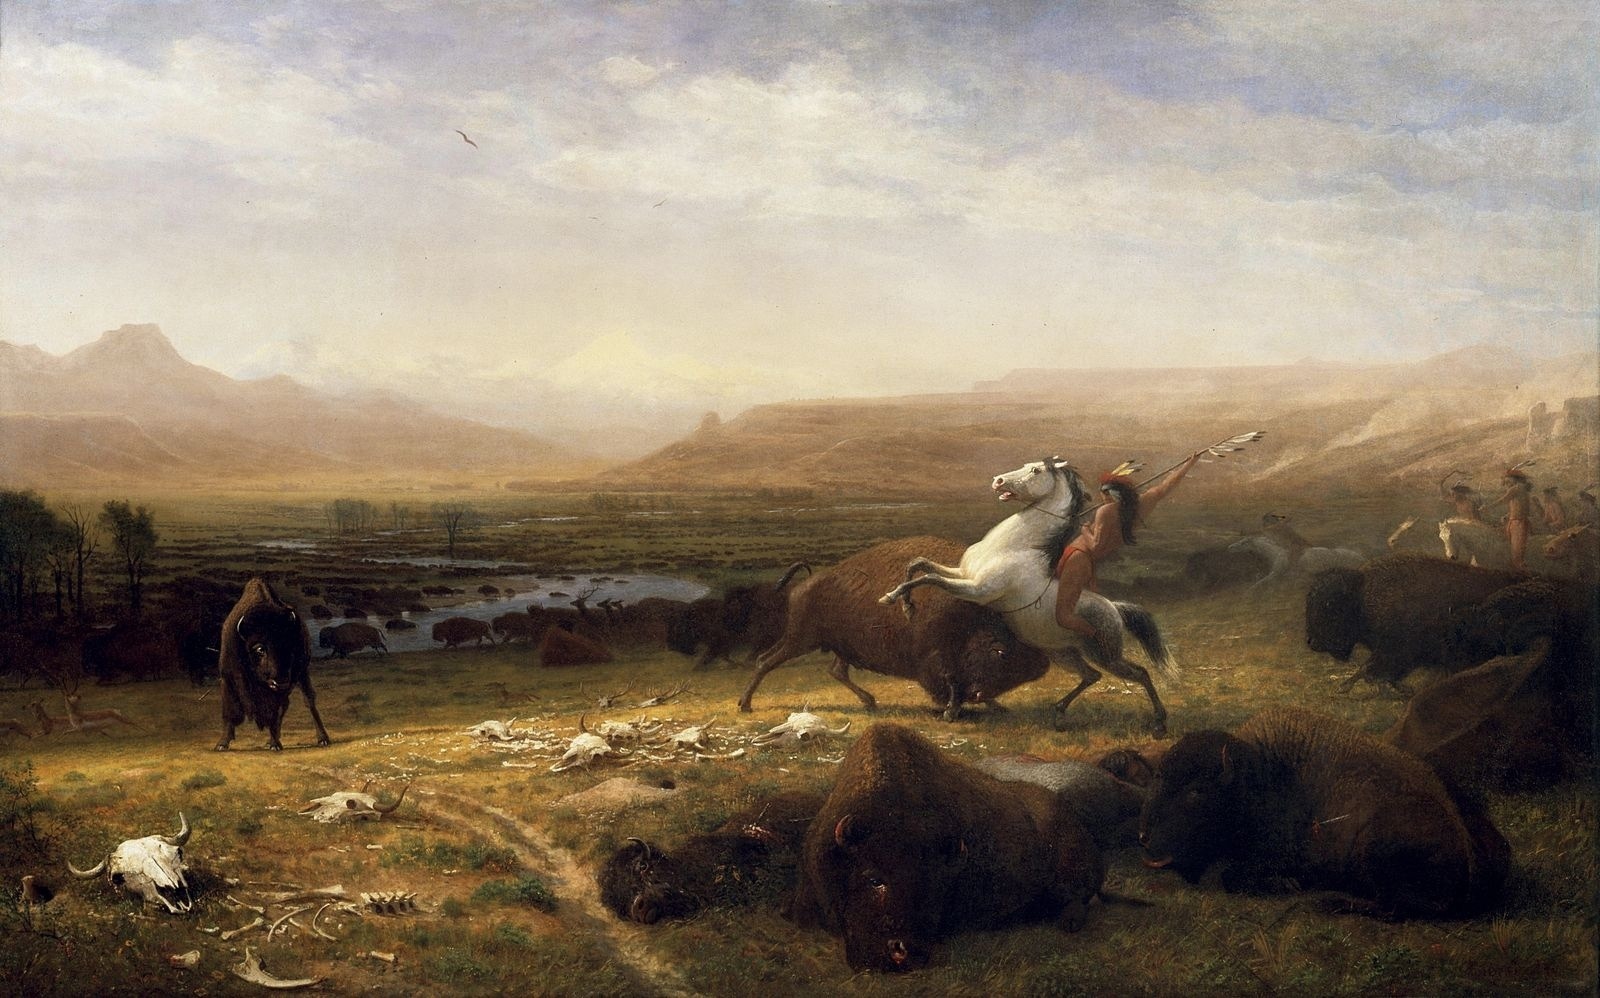 Top: &quot;Portrait of a Stallion&quot; by Albert Bierstadt. Here's a fun fine art anecdote. Bierstadt, among the most revered romantic painters of his time and icon of the Hudson River School, completed the sketch of the white stallion as part of his quest to gather information for his masterwork, &quot;The Last of the Buffalo.&quot;  The latter is a showcase work and part of the permanent collection at the Whitney Gallery of Western Art at the Buffalo Bill Center for the West in Cody, Wyoming. The sketch, remarkably, is also in the collection. Images courtesy Whitney Gallery of Western Art.